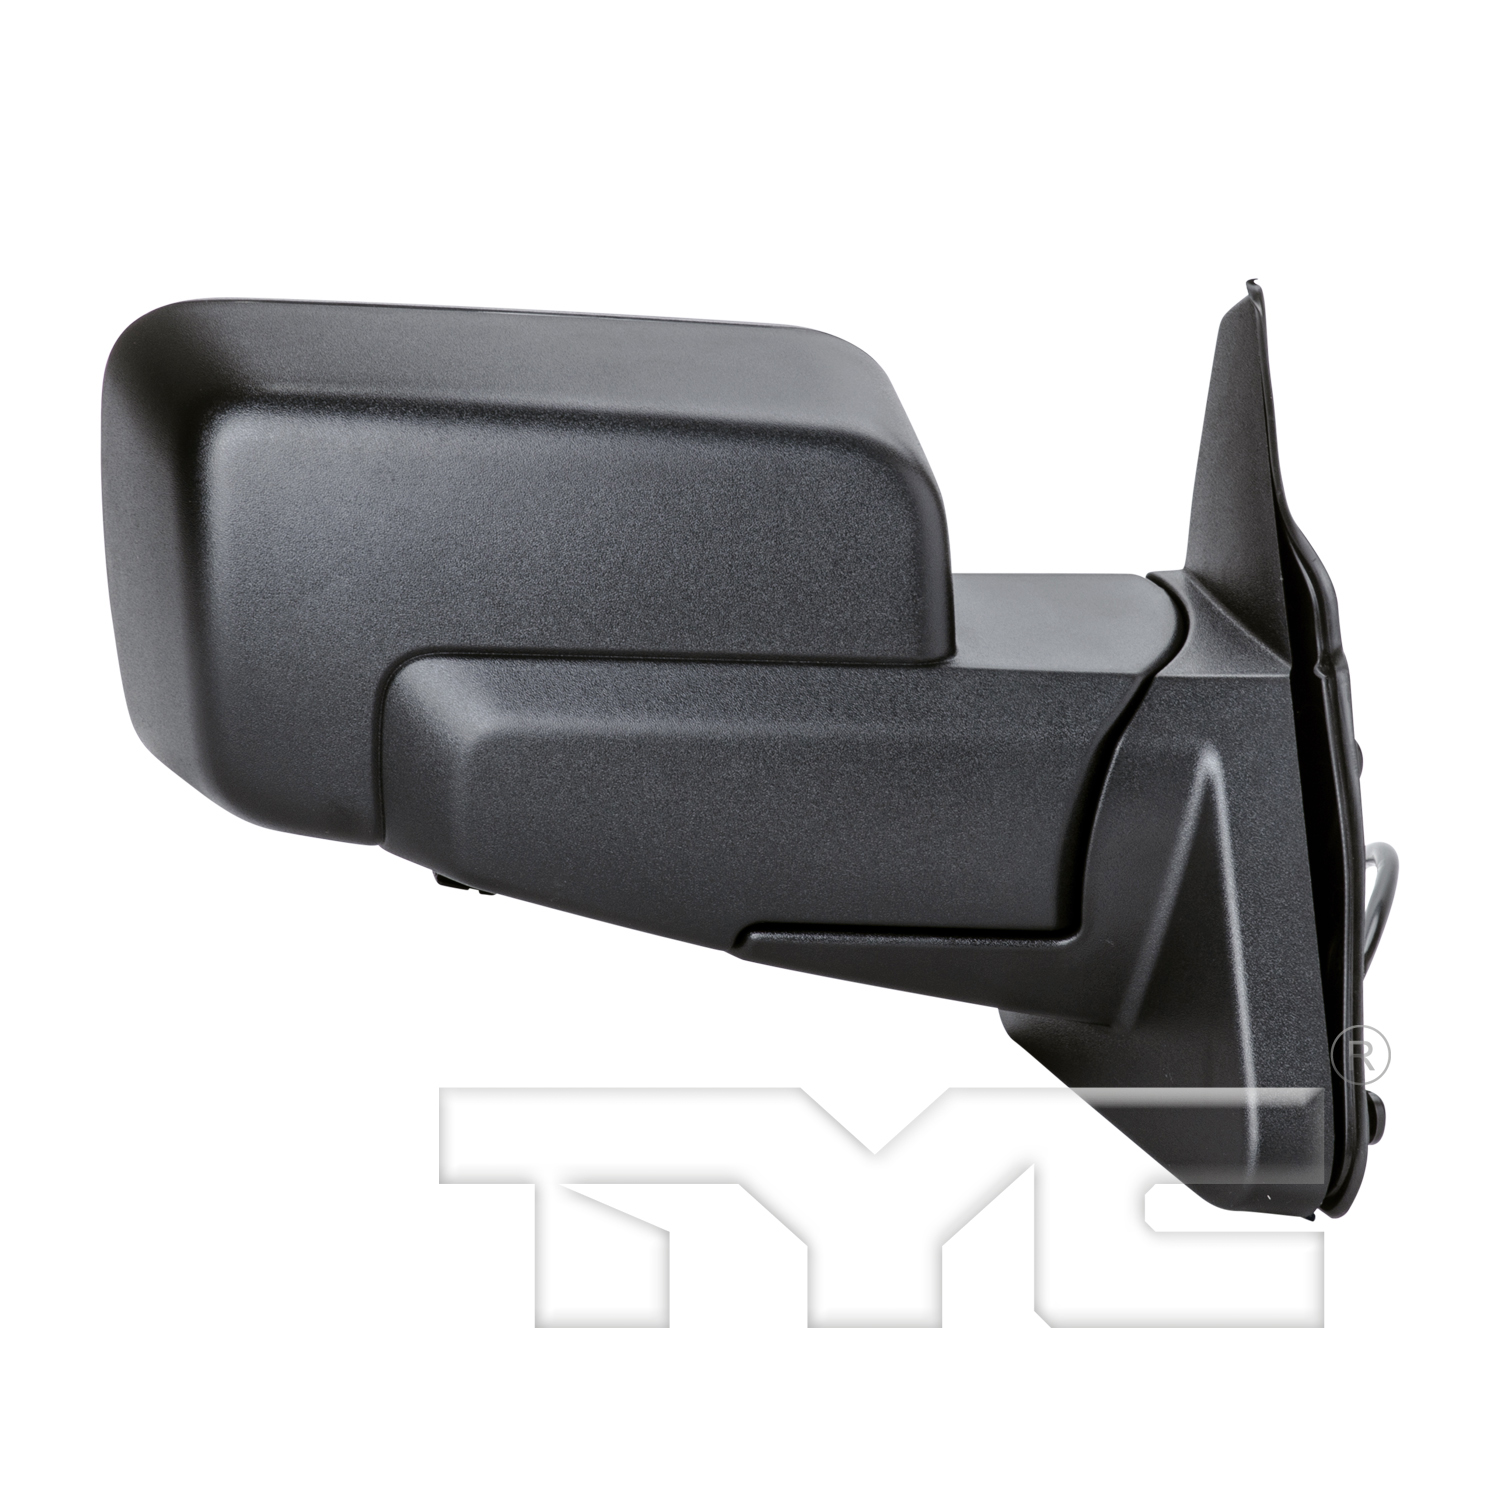 Aftermarket MIRRORS for JEEP - COMMANDER, COMMANDER,06-10,RT Mirror outside rear view